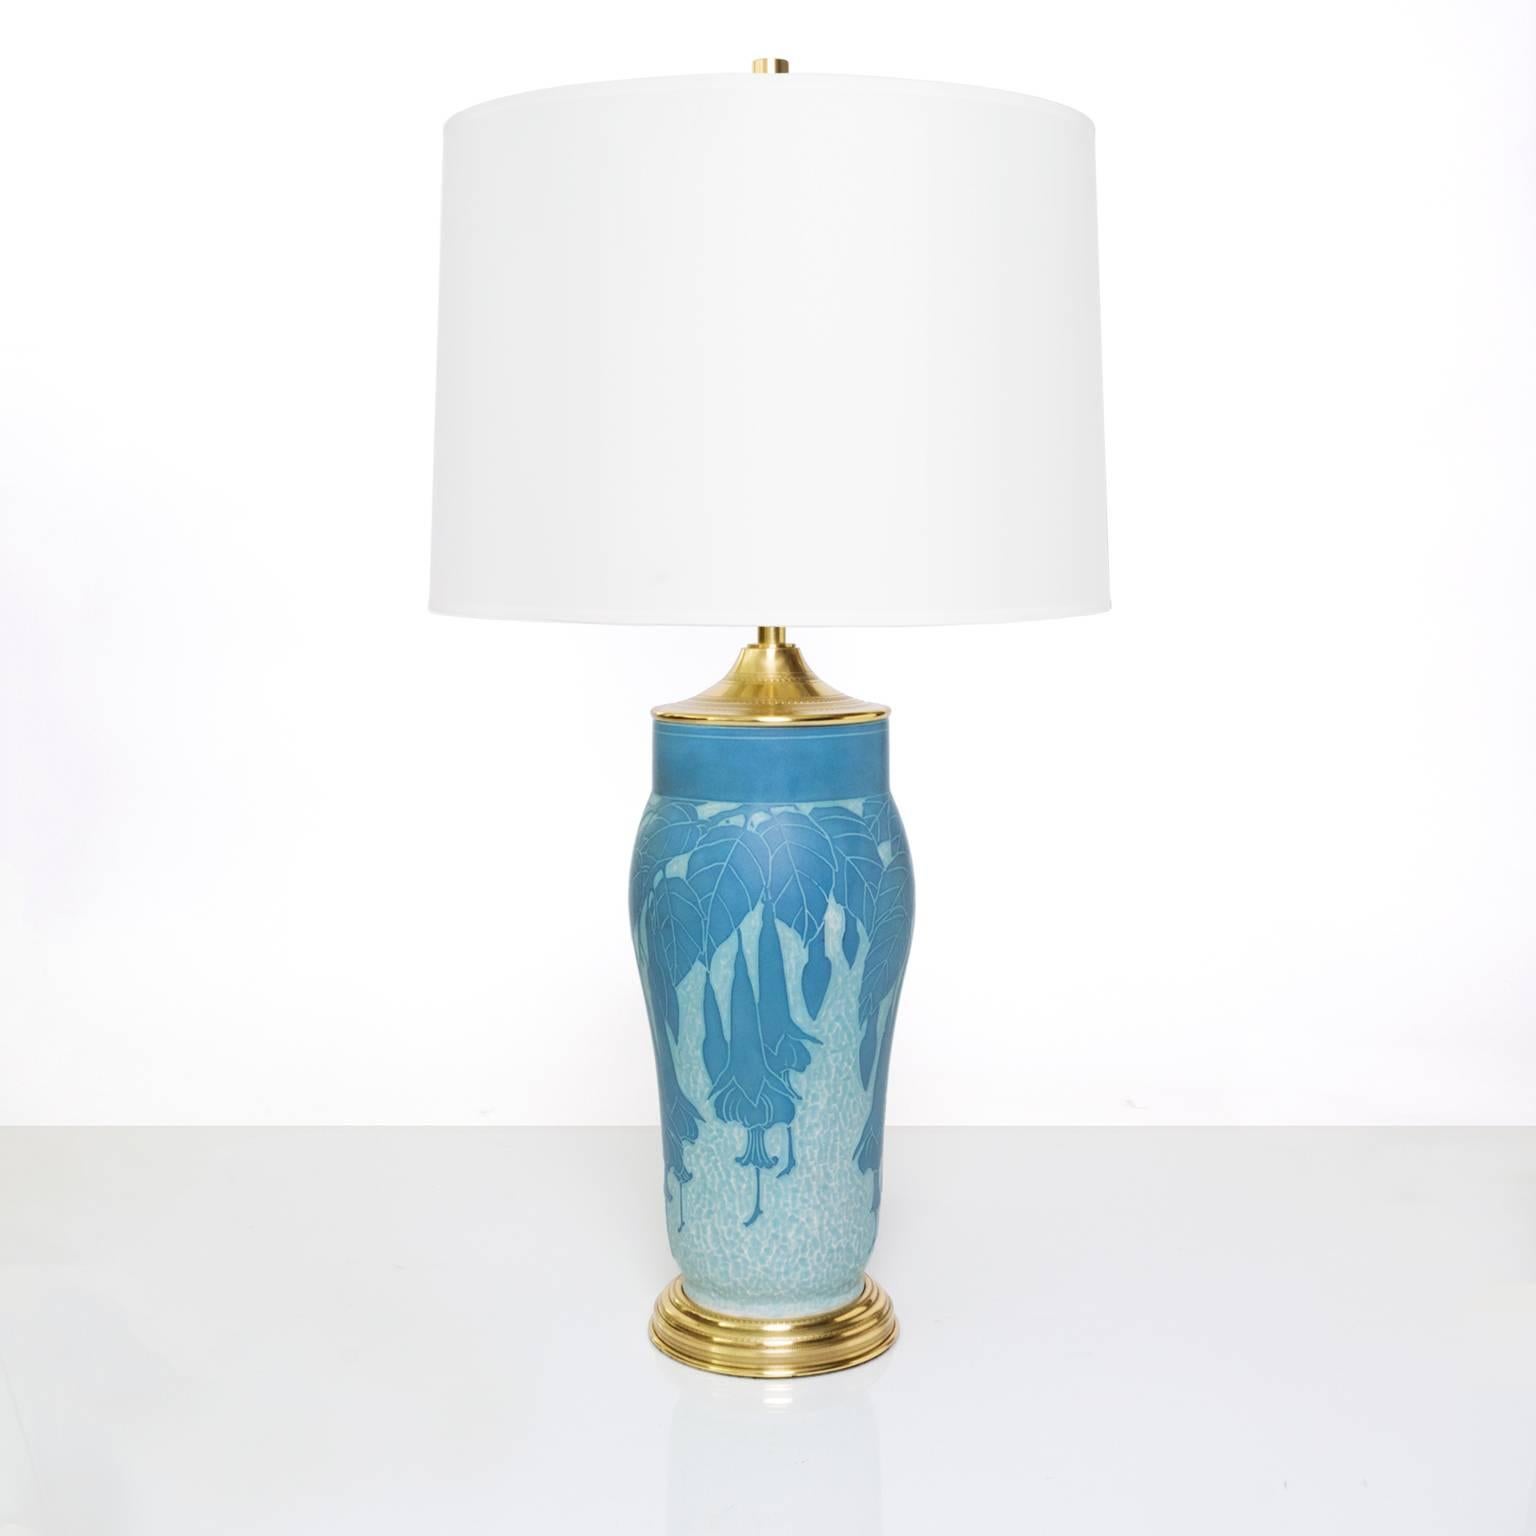 A Scandinavian Modern, Swedish Art Deco table lamp in ceramic "Sgraffito" technique with a floral vine motif. The lamp retains its original polished brass foot and cap which has been polished and lacquered. Newly rewired with a polished